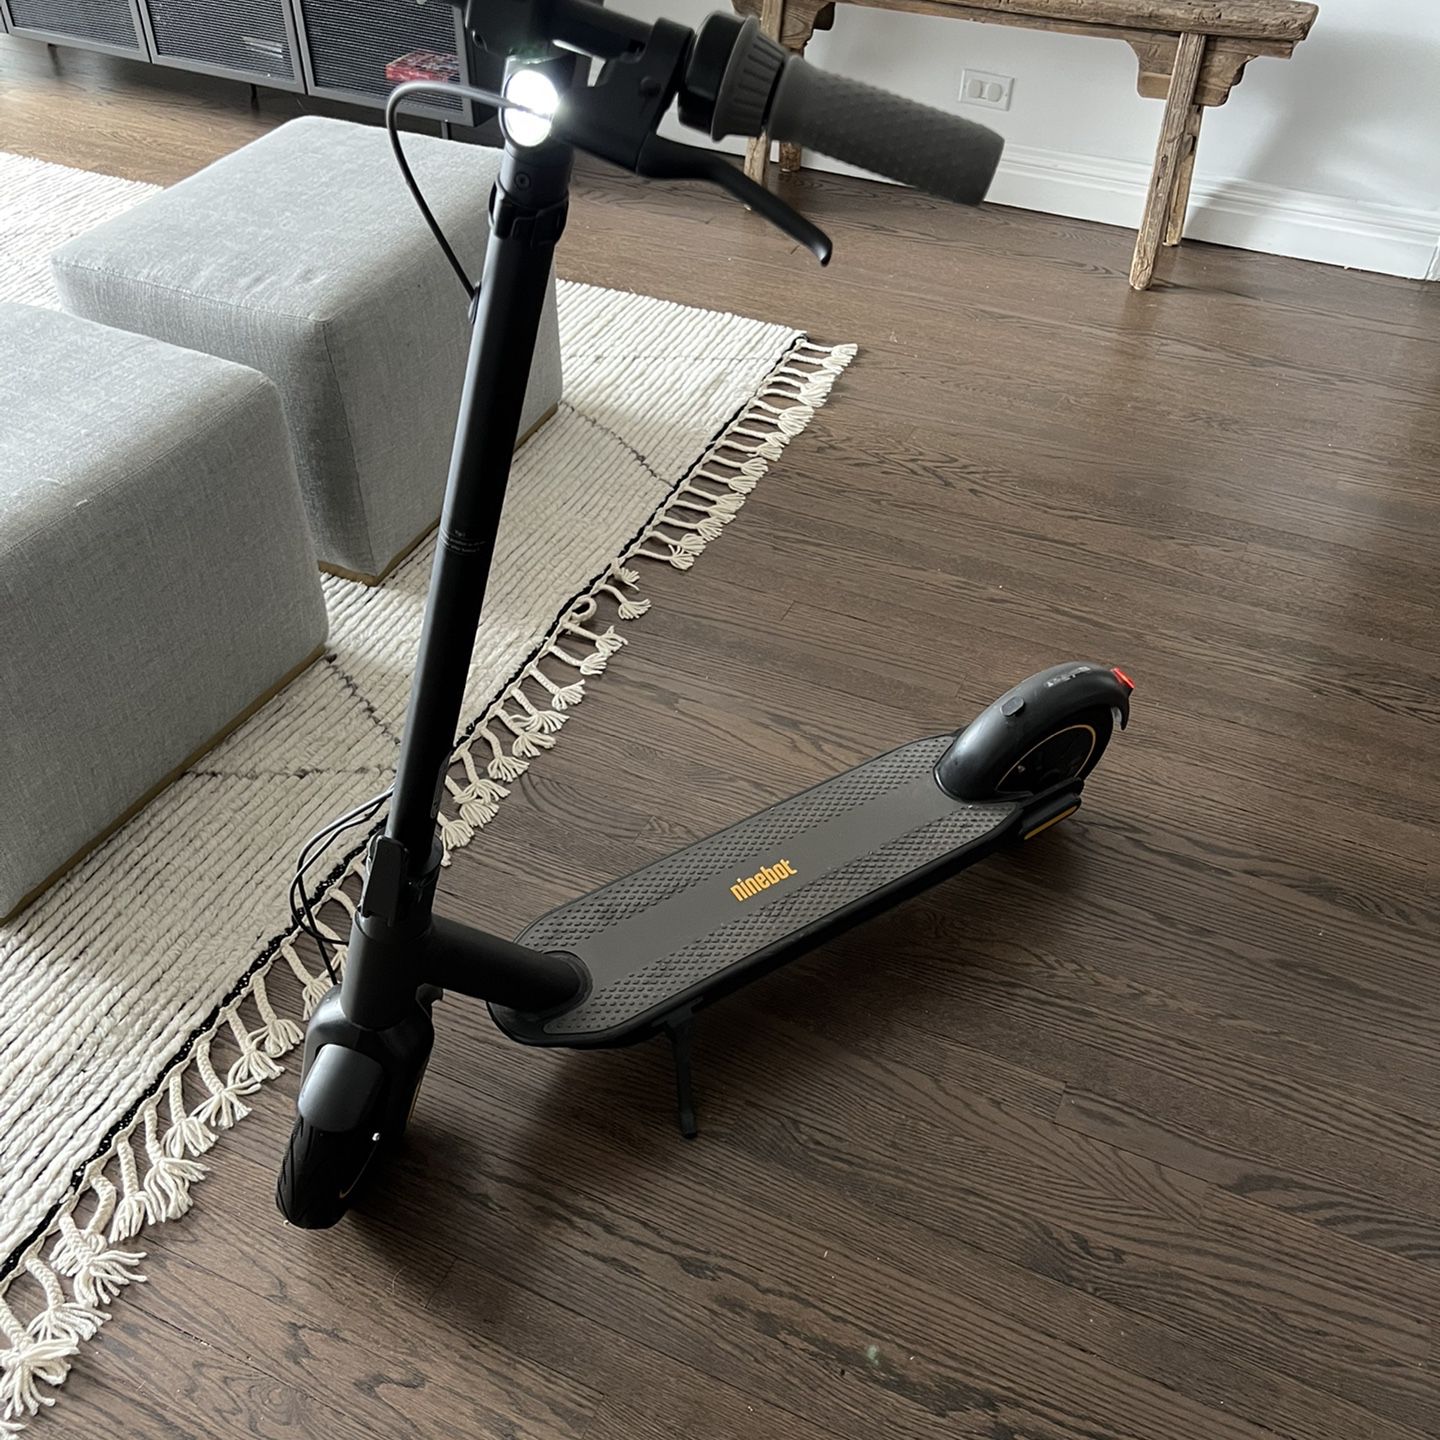 Ninebot Max G30 Electric Scooter Review - Tech Advisor